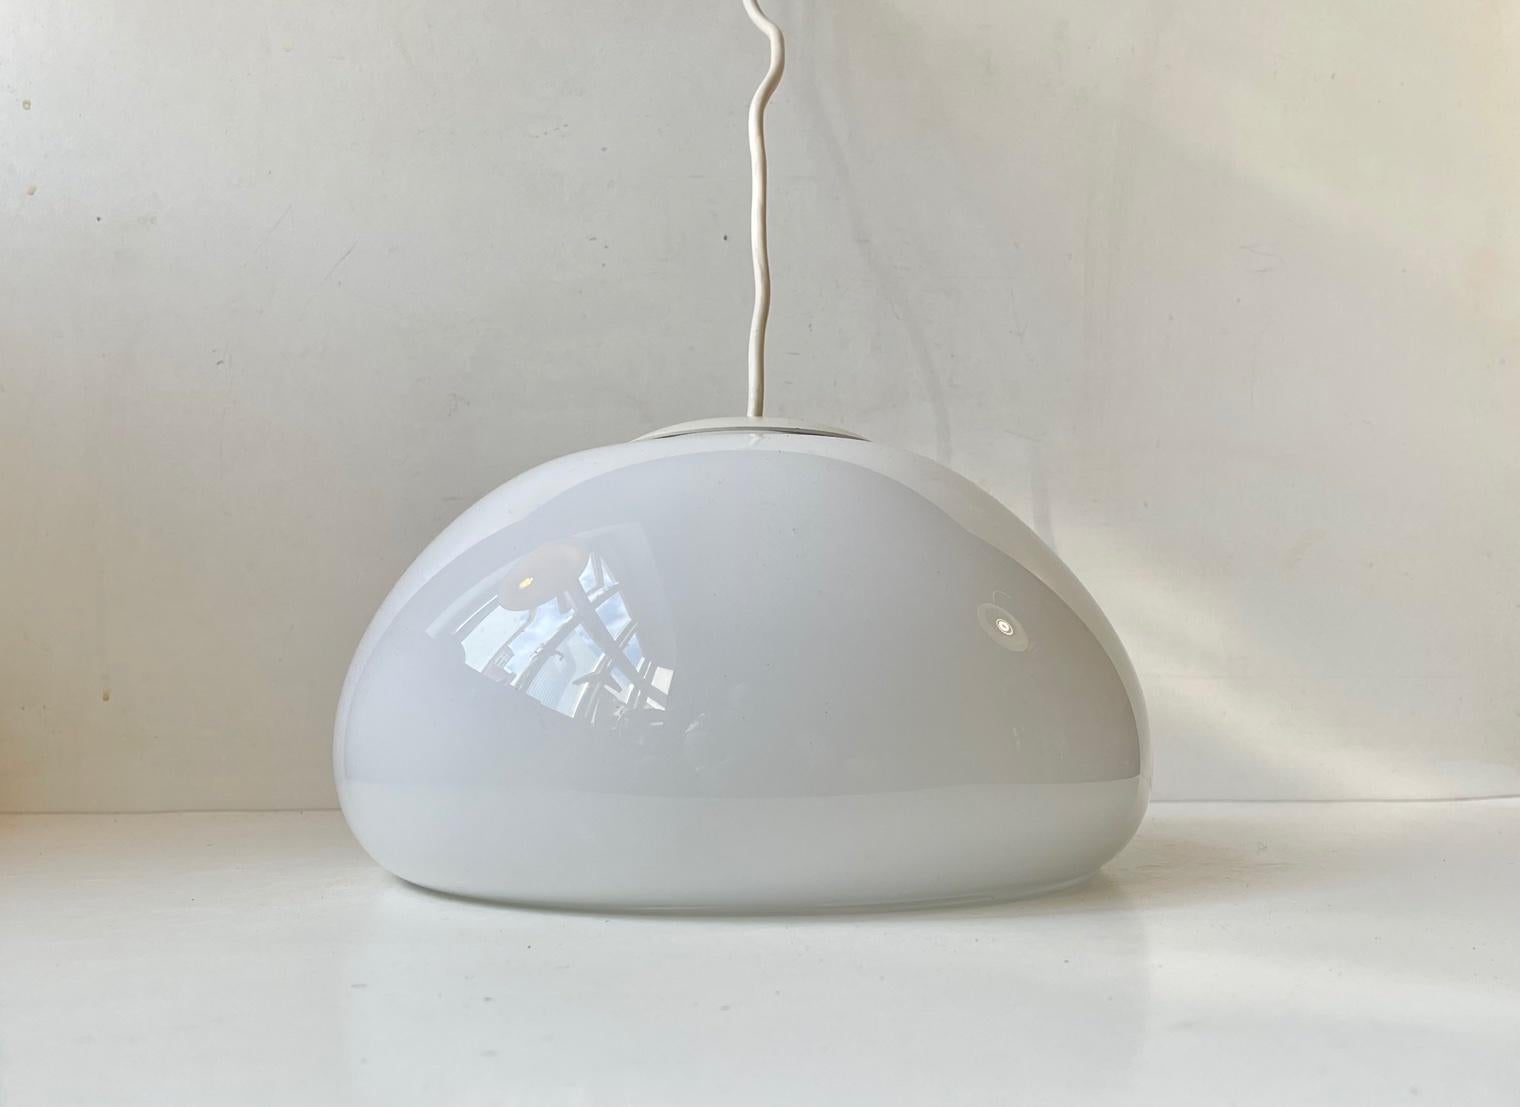 A rare hand-blown cased white opaline glass pendant light designed by Per Lütken and manufactured by Holmegaard in Denmark during the late 1970s or early 80s. It is called Sunset and is characterized by its almost mushroom shape. Measurements: